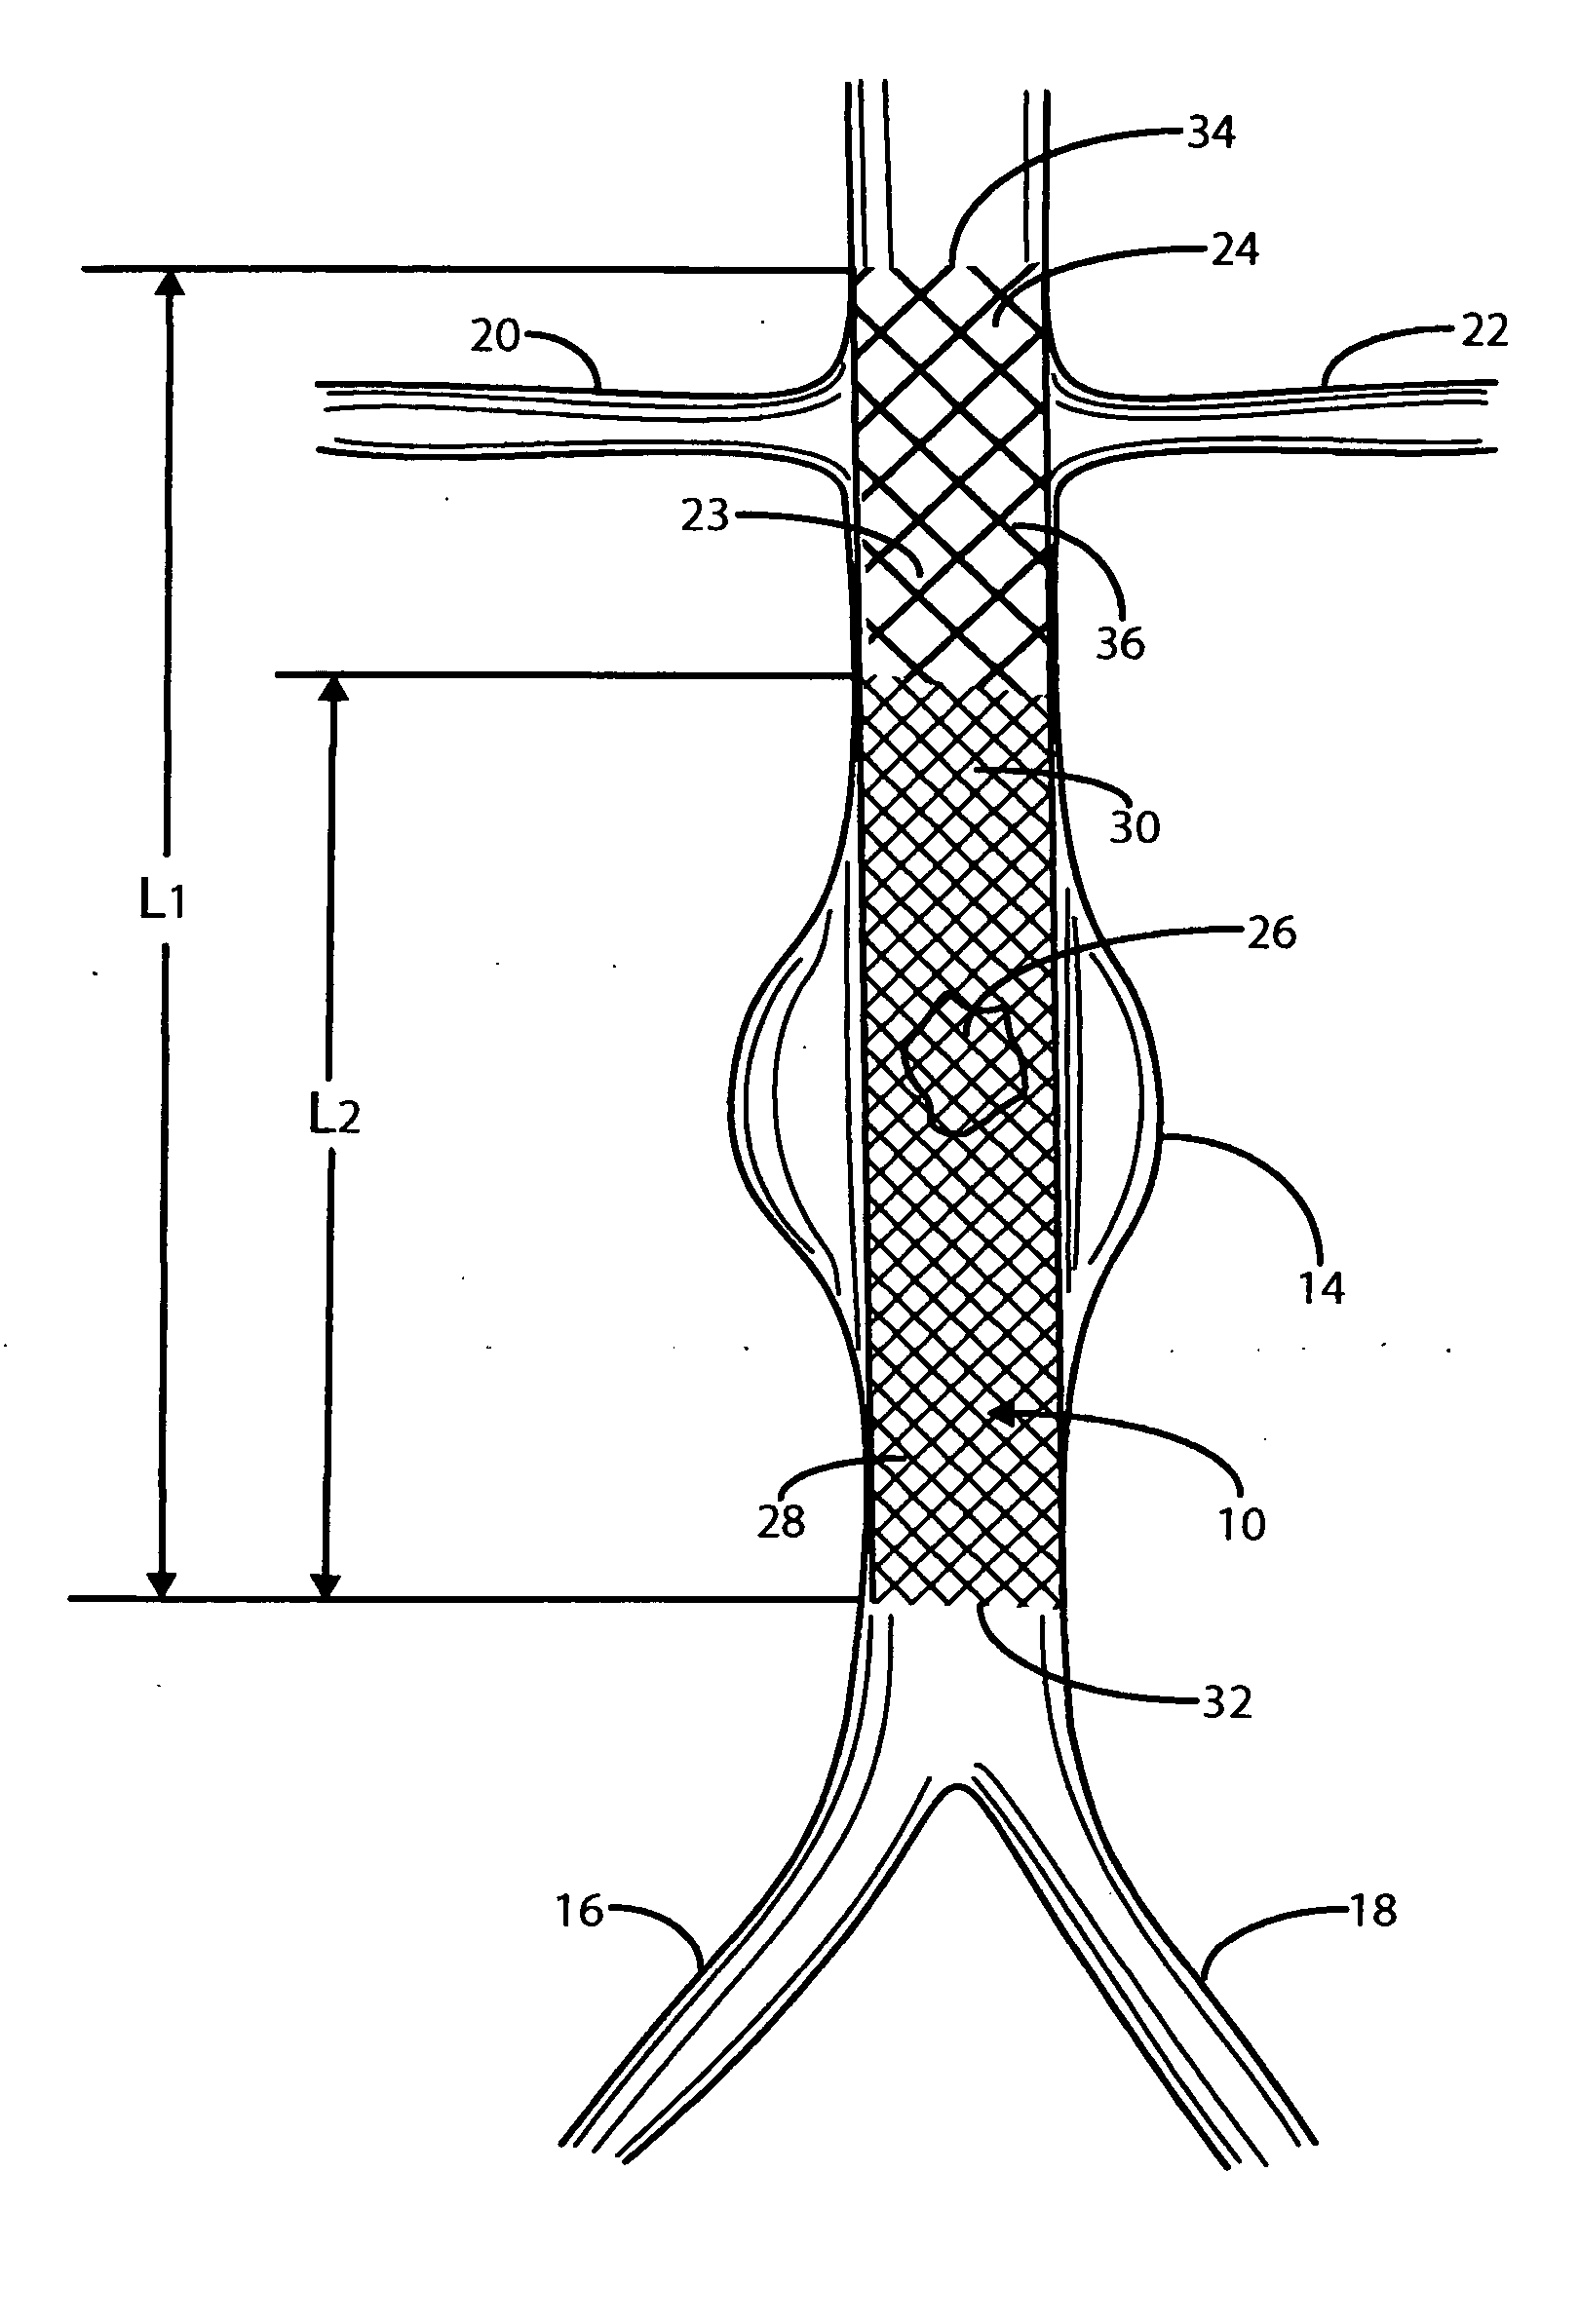 Intravascular deliverable stent for reinforcement of abdominal aortic aneurysm